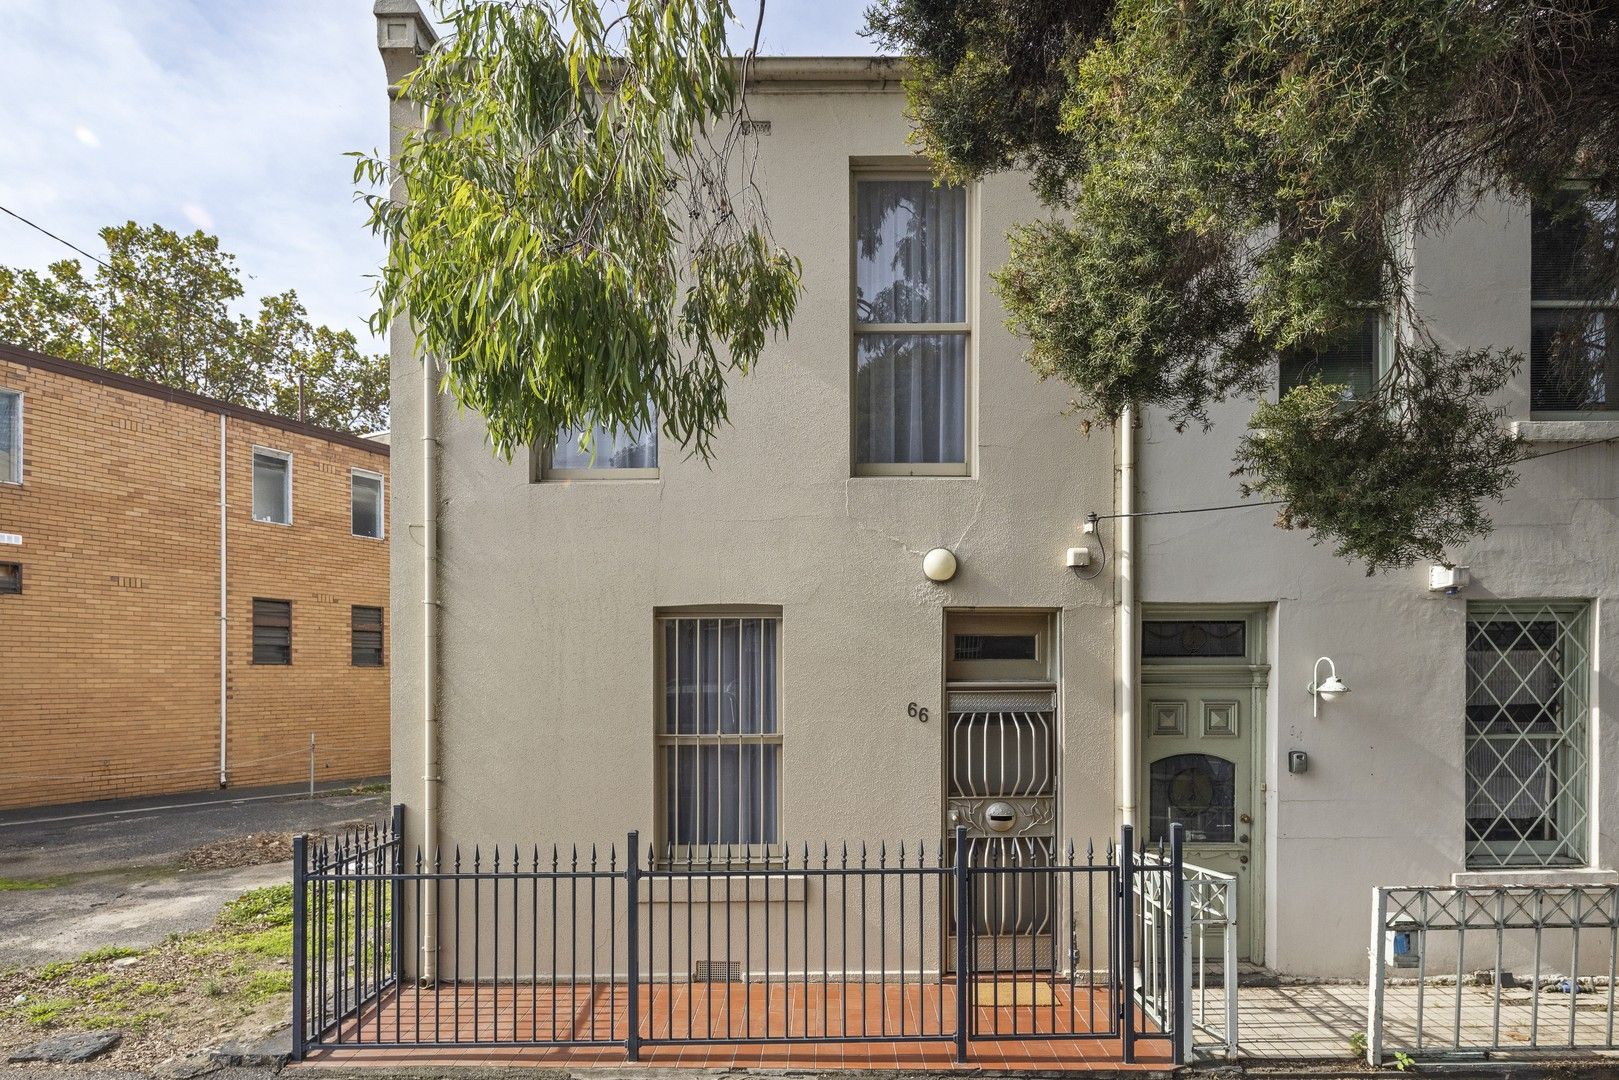 2 bedrooms House in 66 O'Connell Street MELBOURNE VIC, 3000